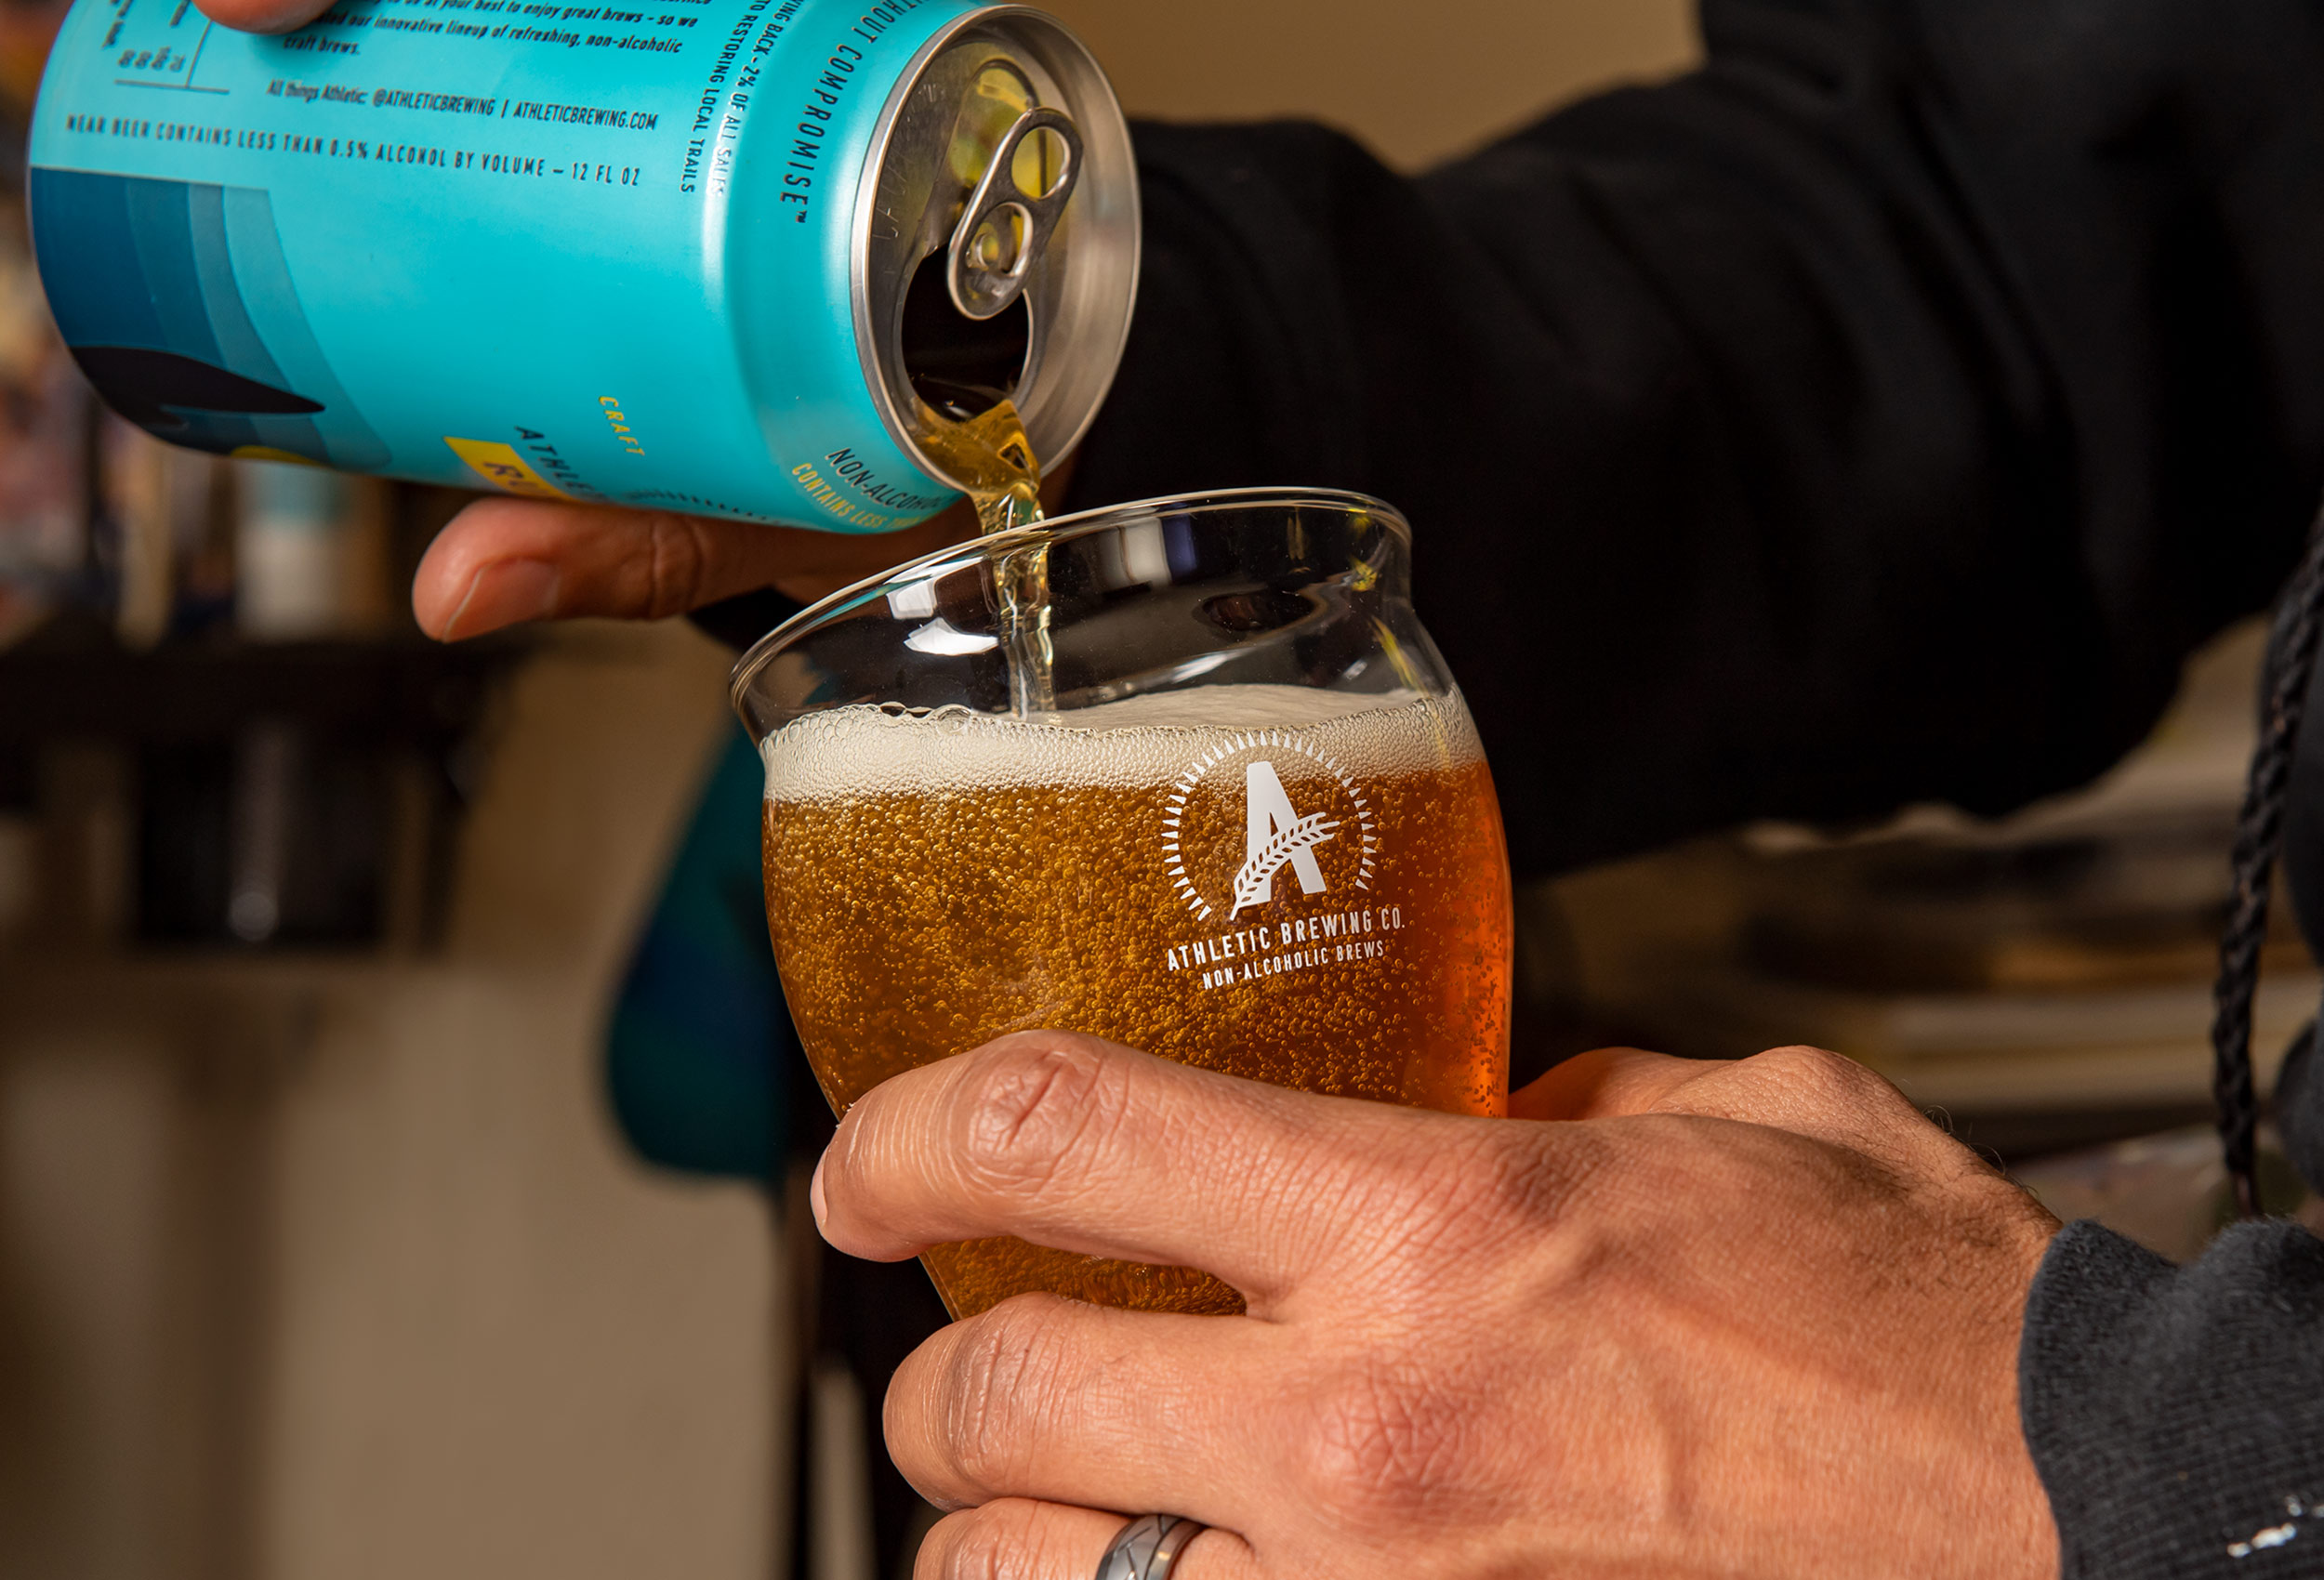 Close up pouring can of Run Wild non-alcoholic beer into beer glass